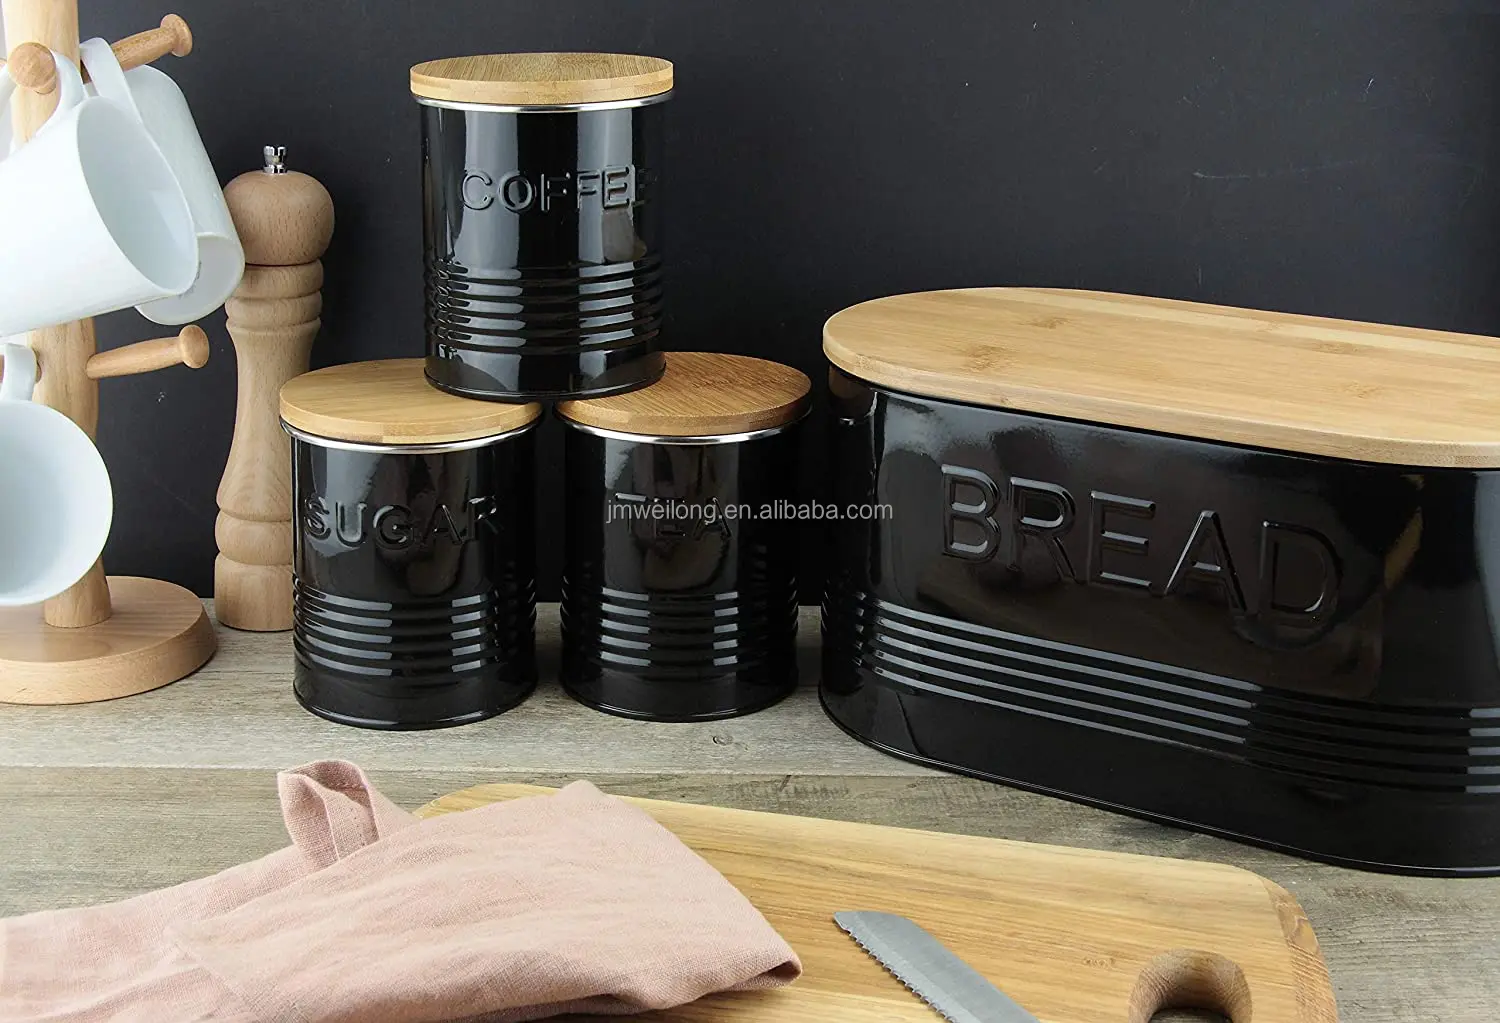 Matching Tea Coffee Sugar Canisters 4pc Stainless Steel Bread Bin w/ Bamboo Lid 